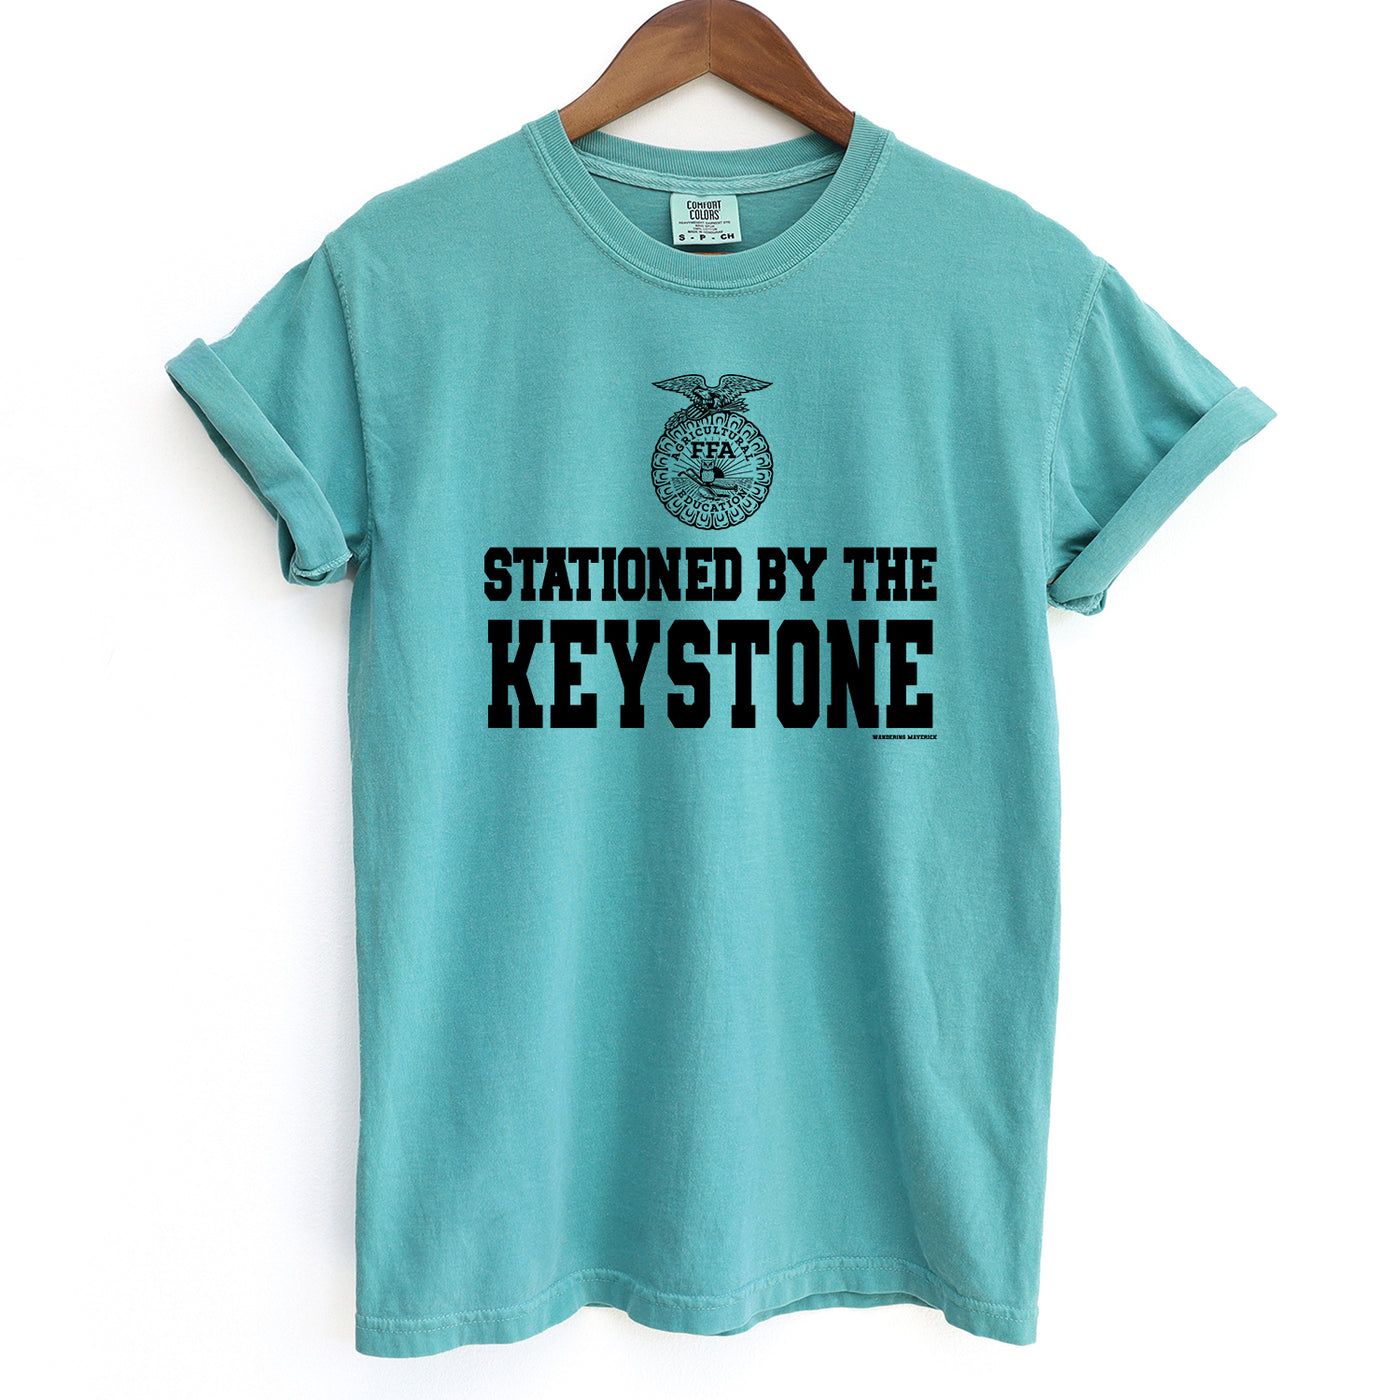 Stationed By The Keystone FFA ComfortWash/ComfortColor T-Shirt (S-4XL) - Multiple Colors!